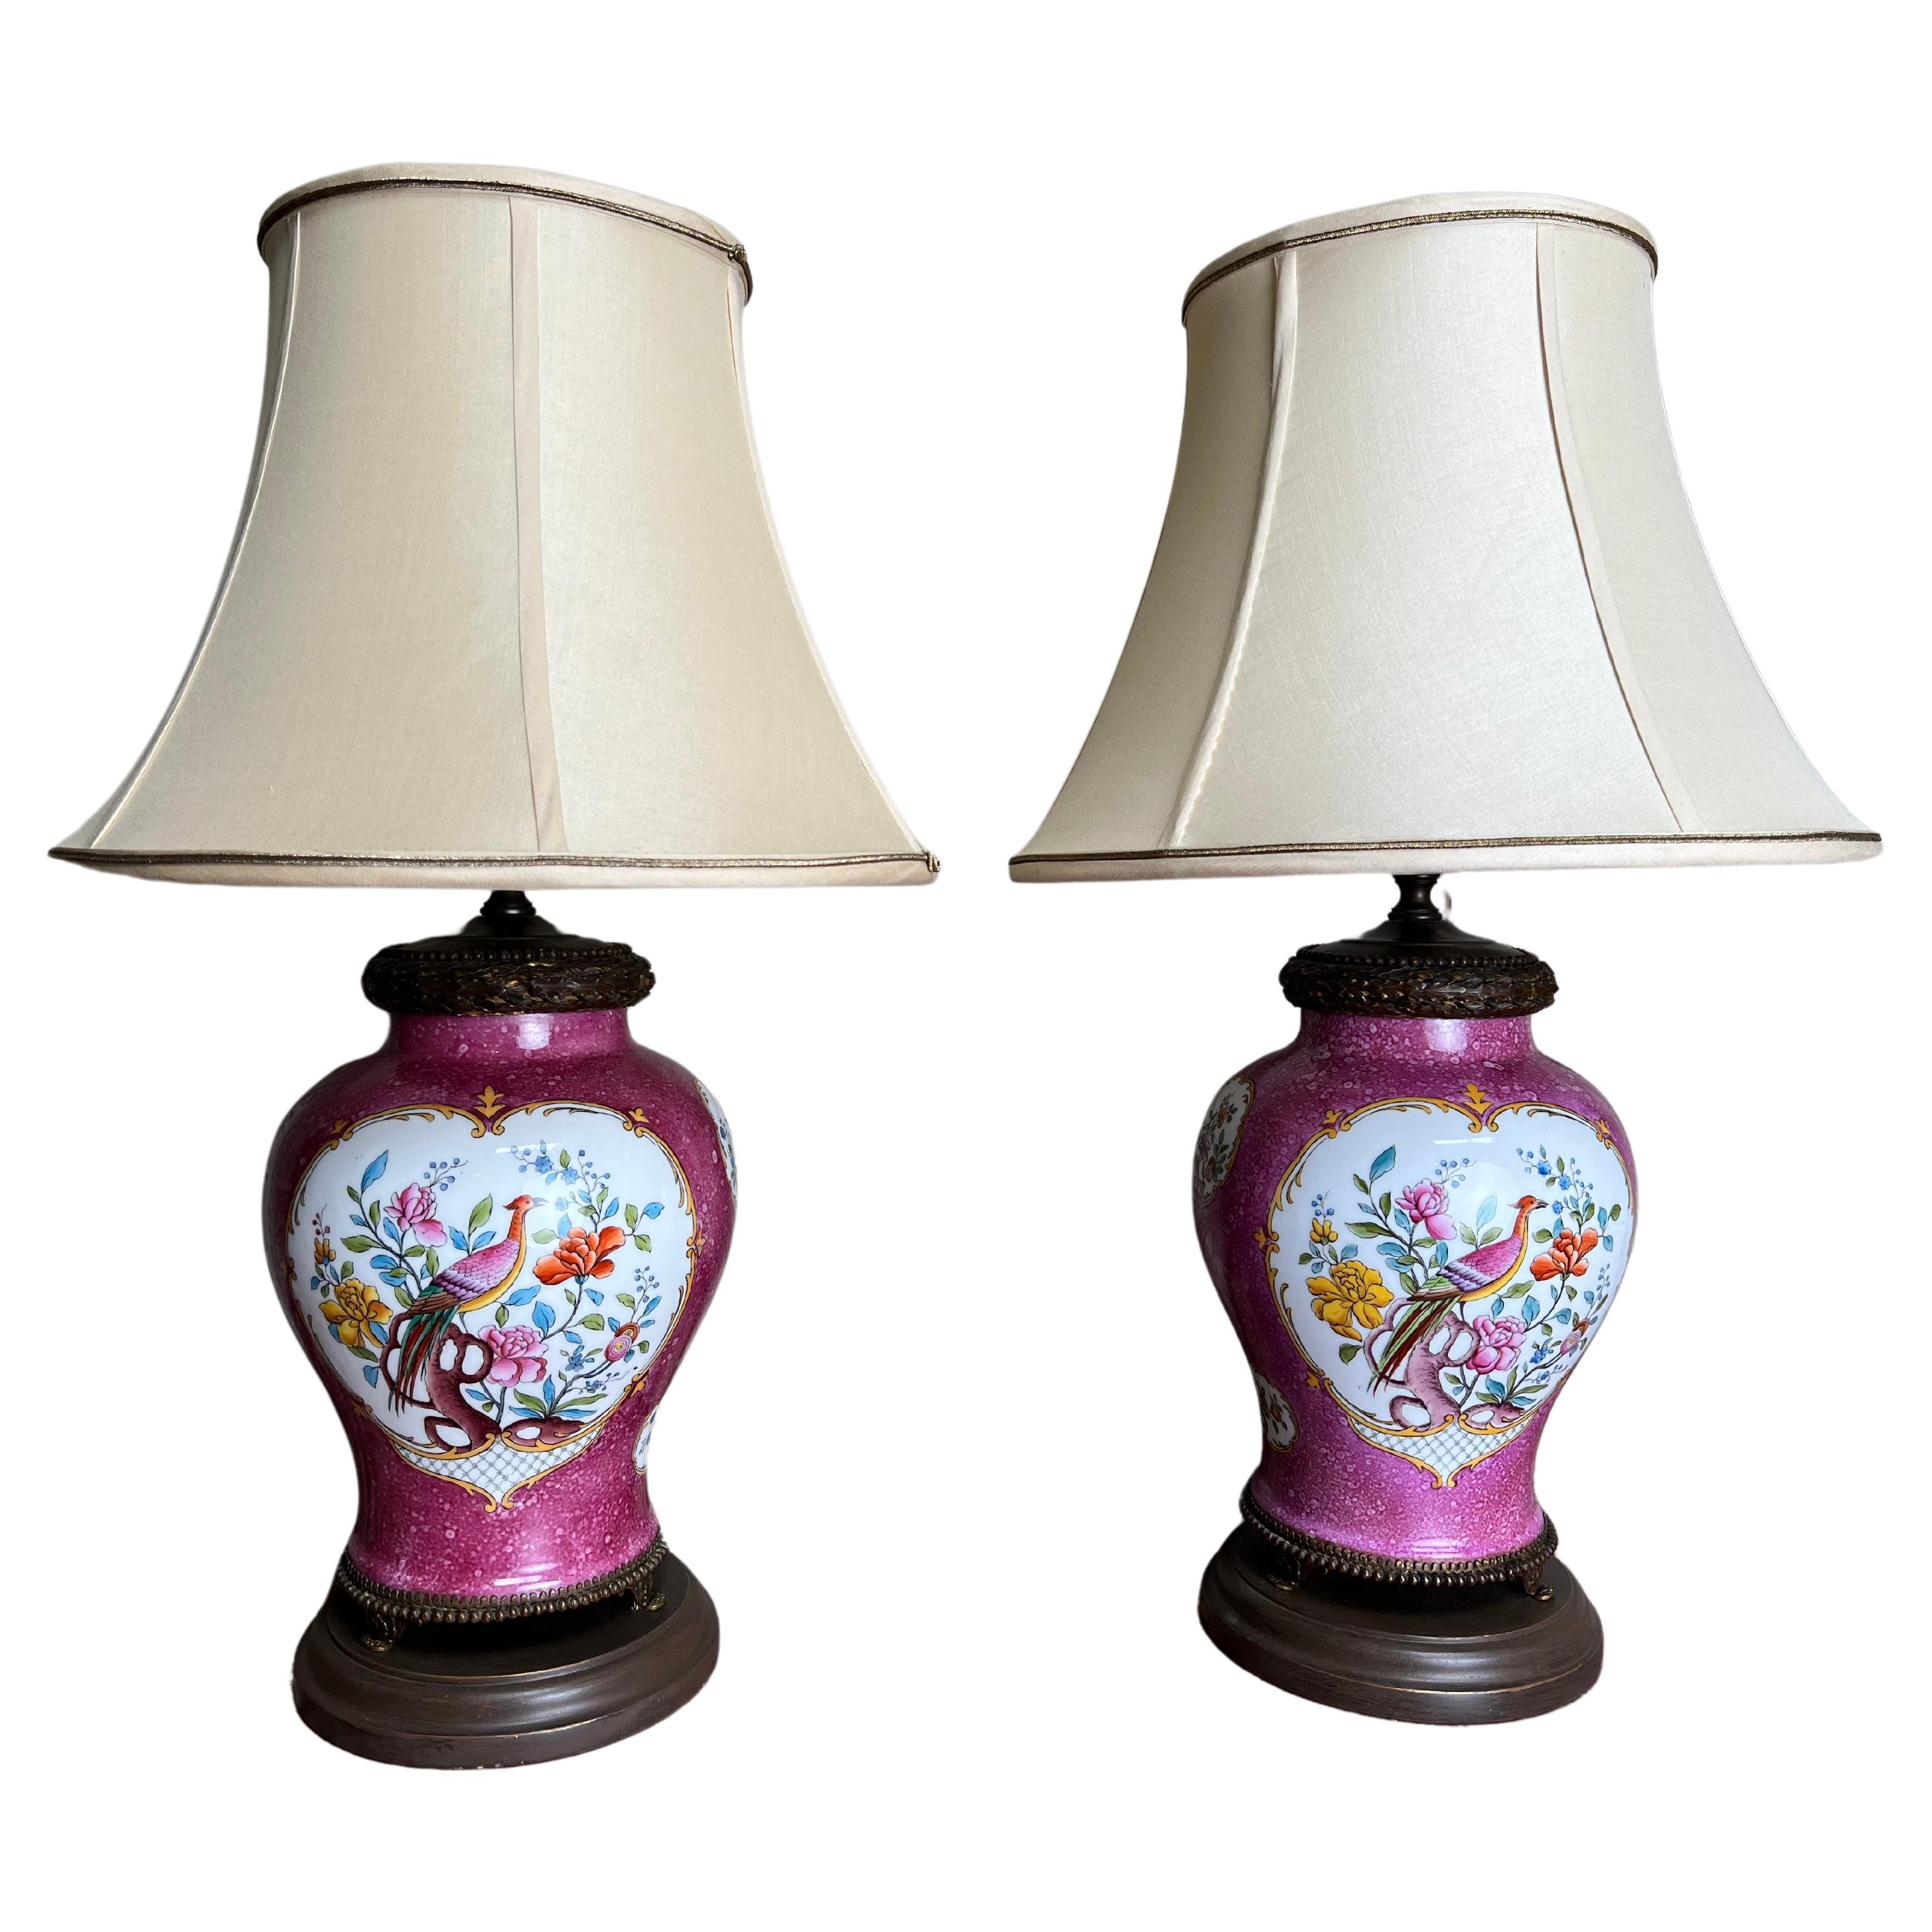 Pair of Pink Porcelain Lamps With Enameled Birds and Flowers